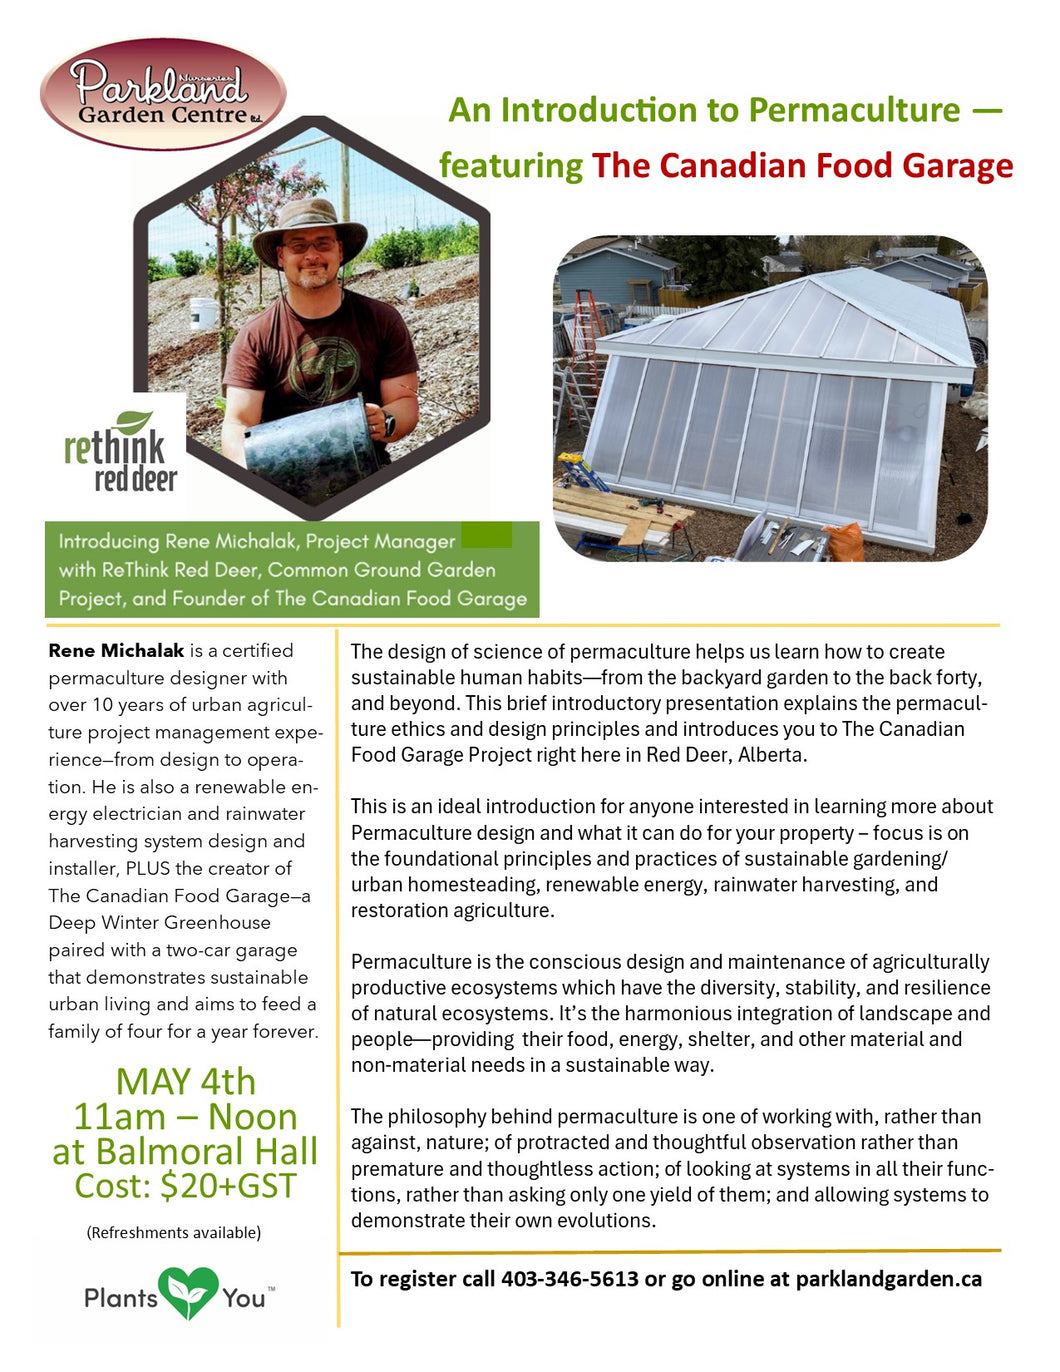 An Introduction to Permaculture featuring The Canadian Food Garage - May 4  11am-Noon